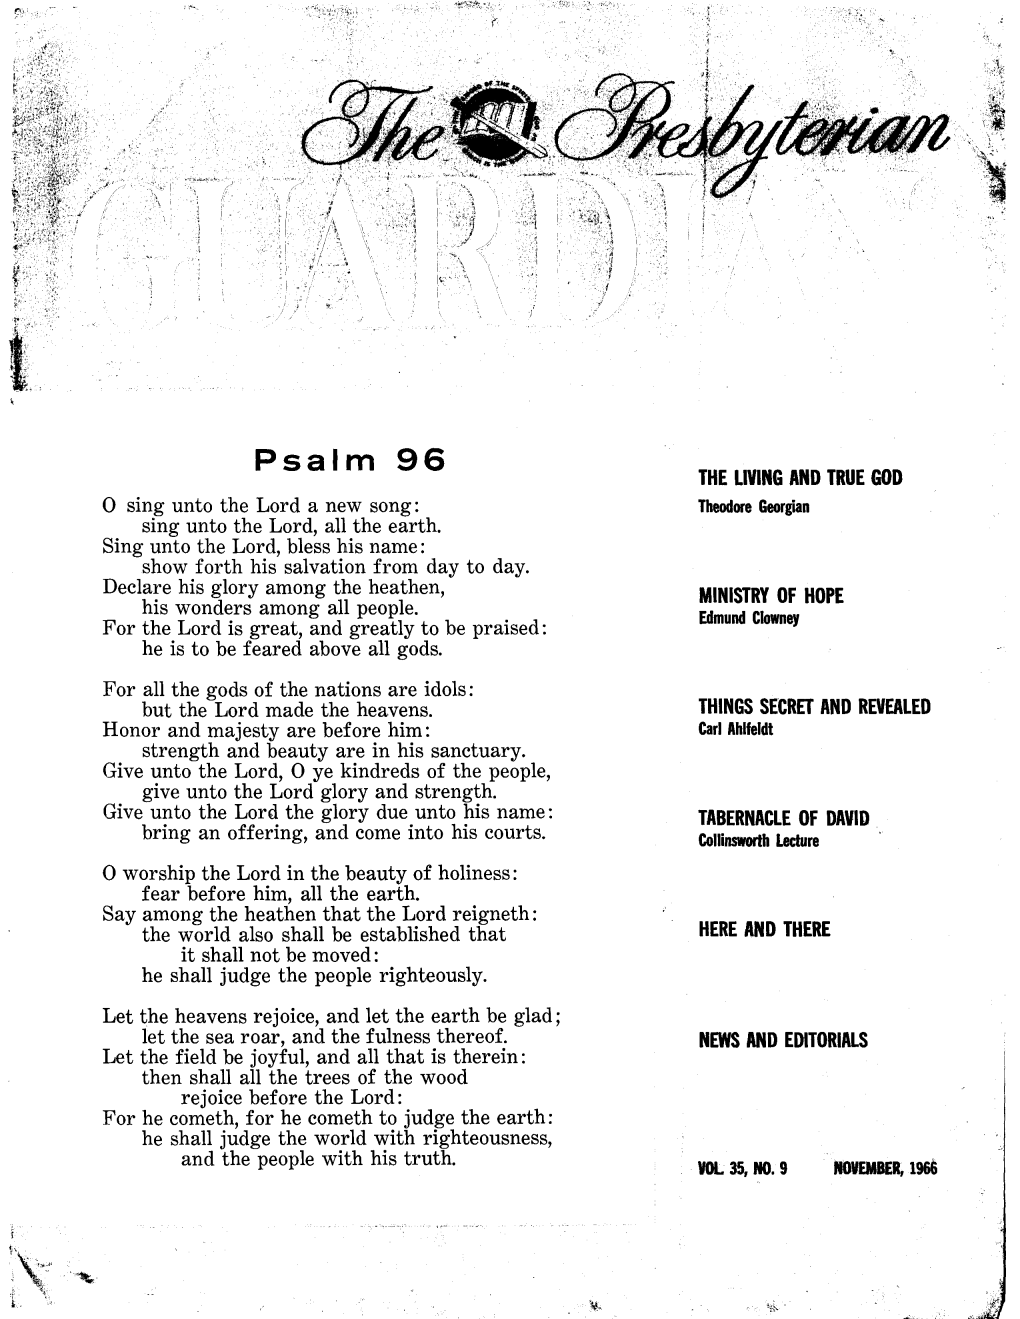 Psalm 96 the LIVING and TRUE GOD O Sing Unto the Lord a New Song: Theodore Georgian Sing Unto the Lord, All the Earth